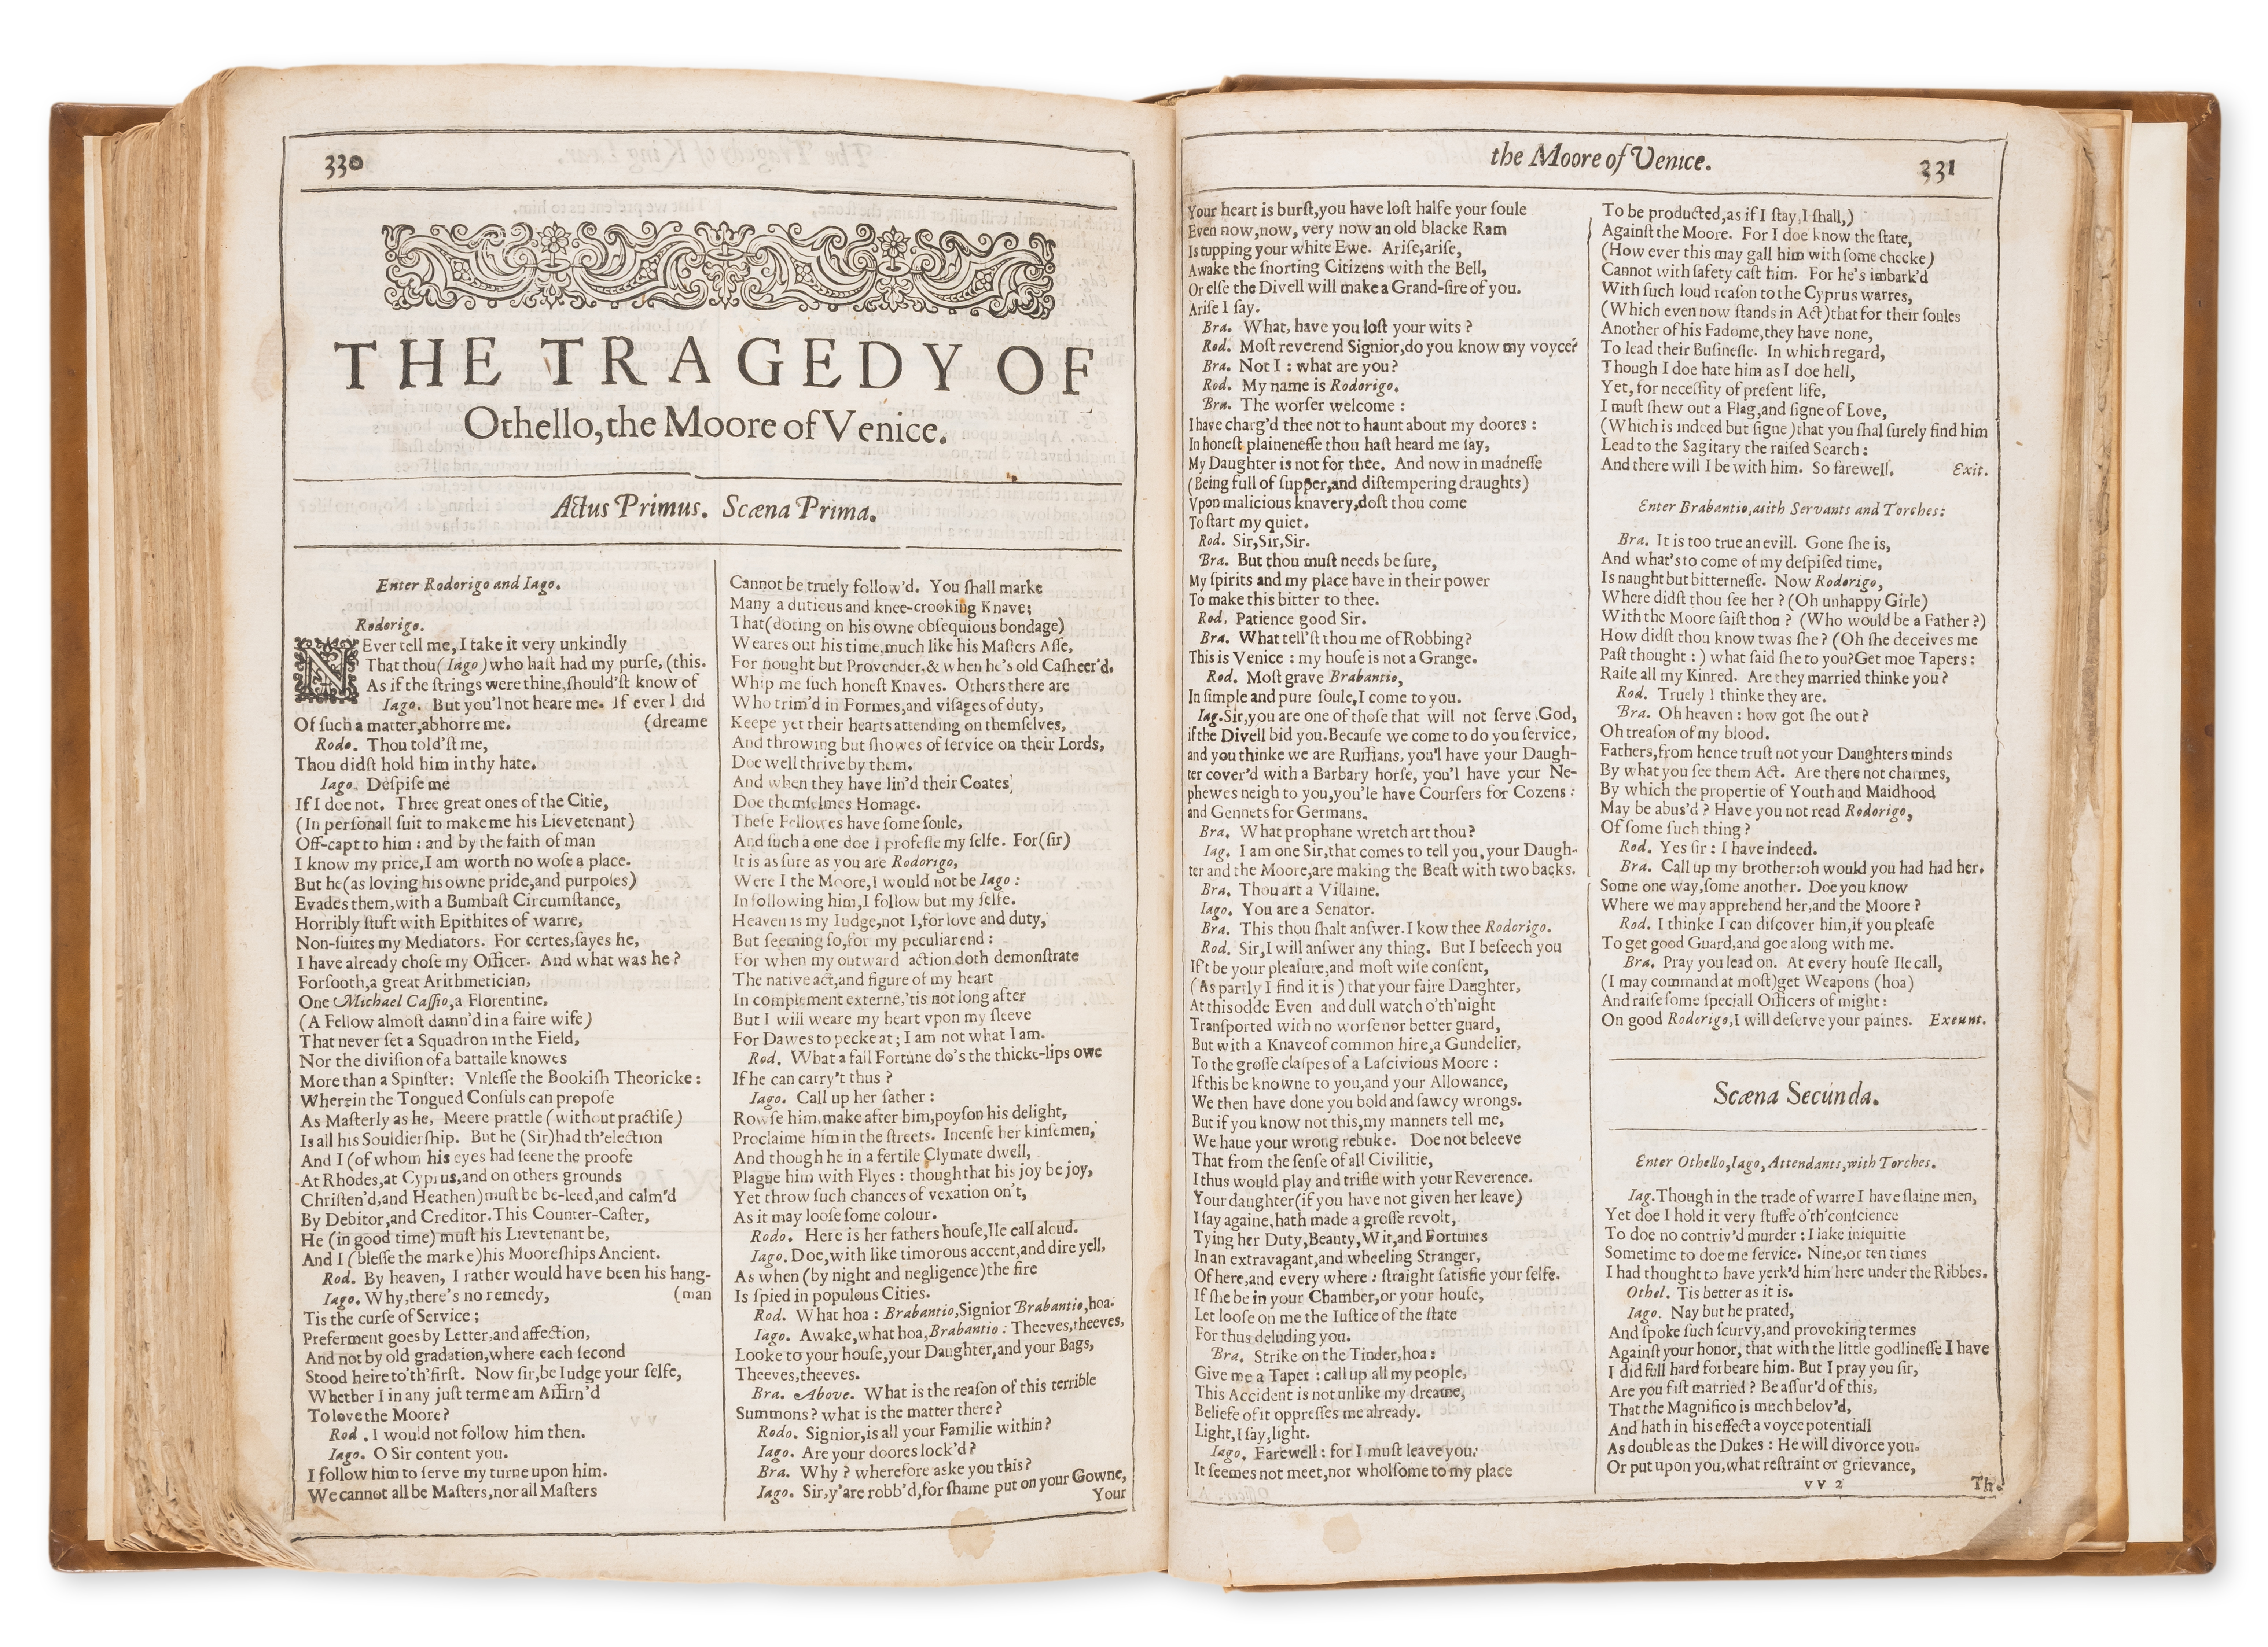 [Shakespeare (William)] [Comedies, Histories, and Tragedies], second folio edition, [by Tho.Cotes... - Image 2 of 5